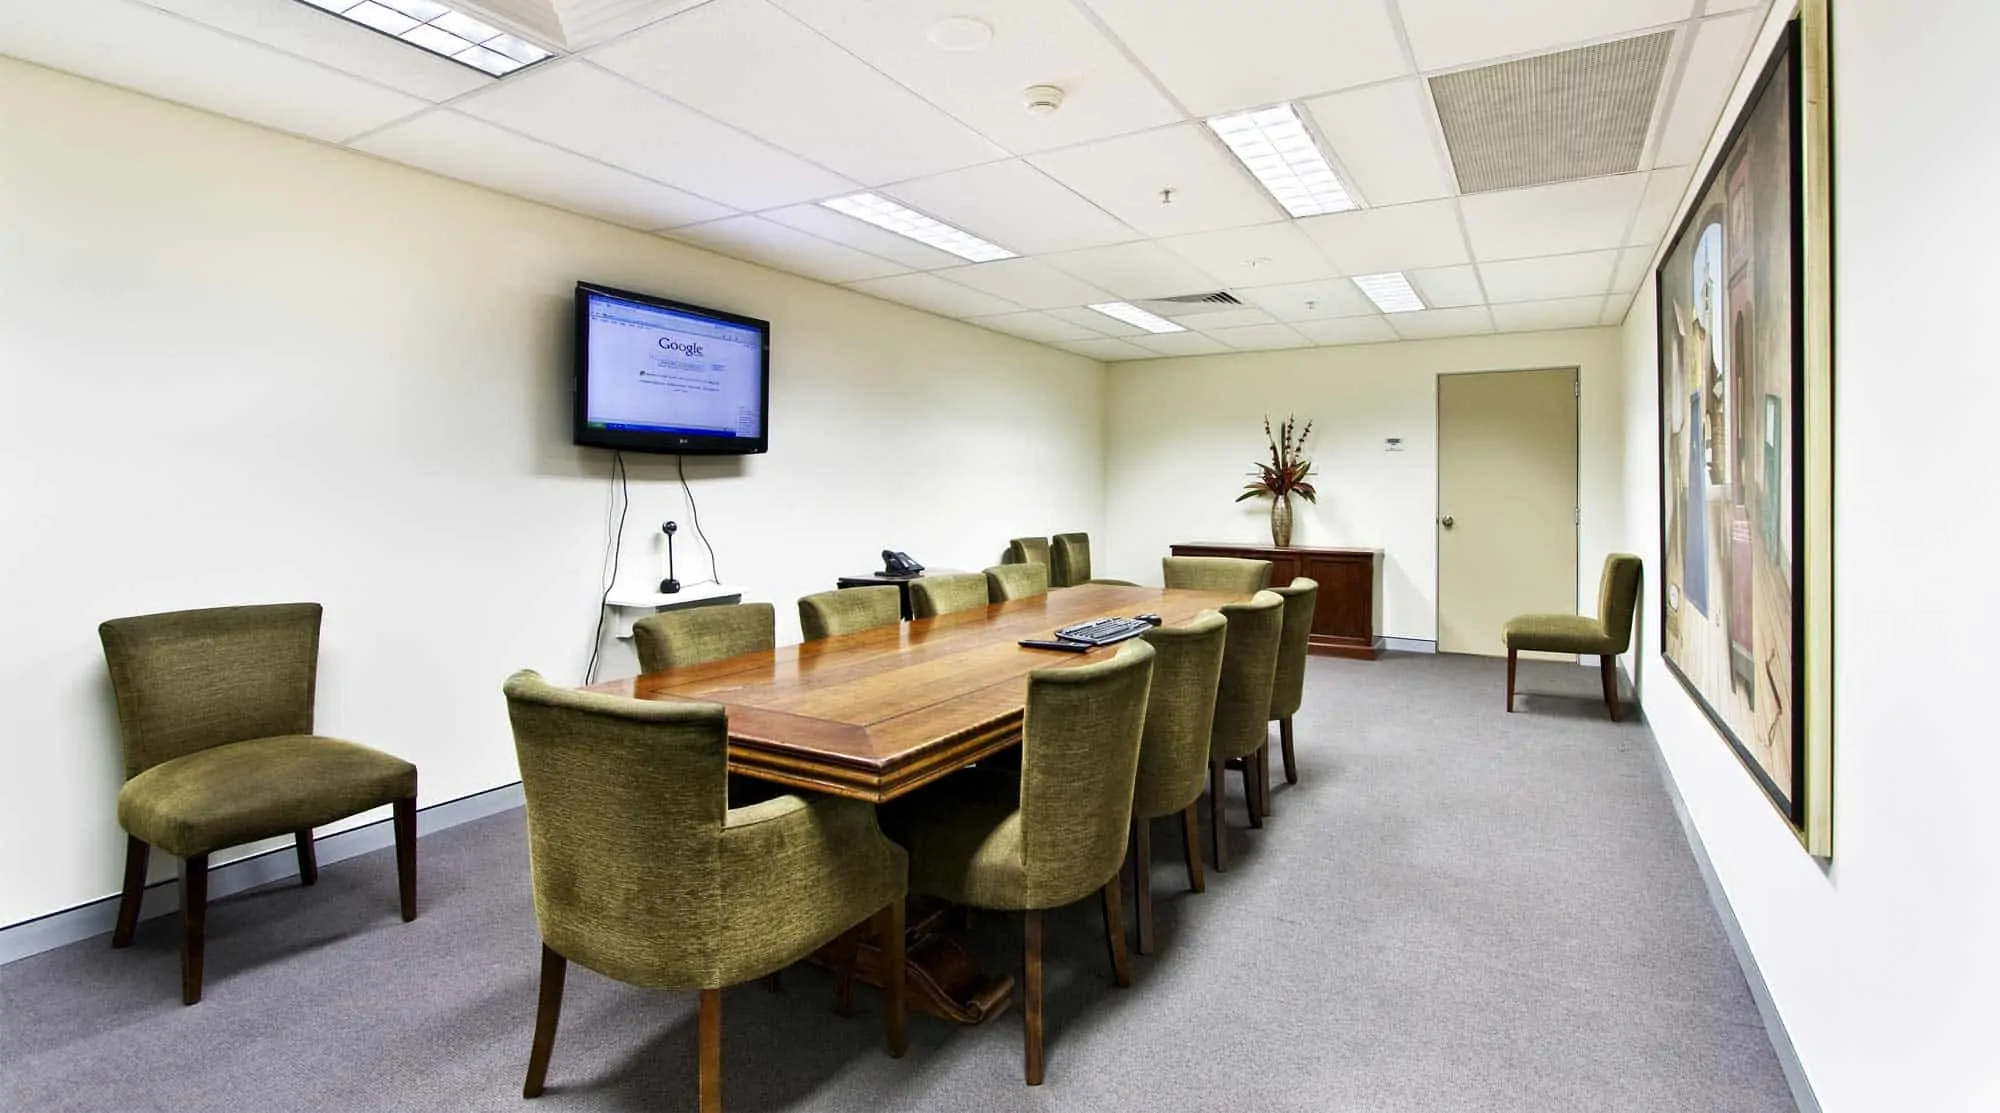 APX Hotels Apartments Accommodation for meeting and teleconferencing world square Sydney Australia